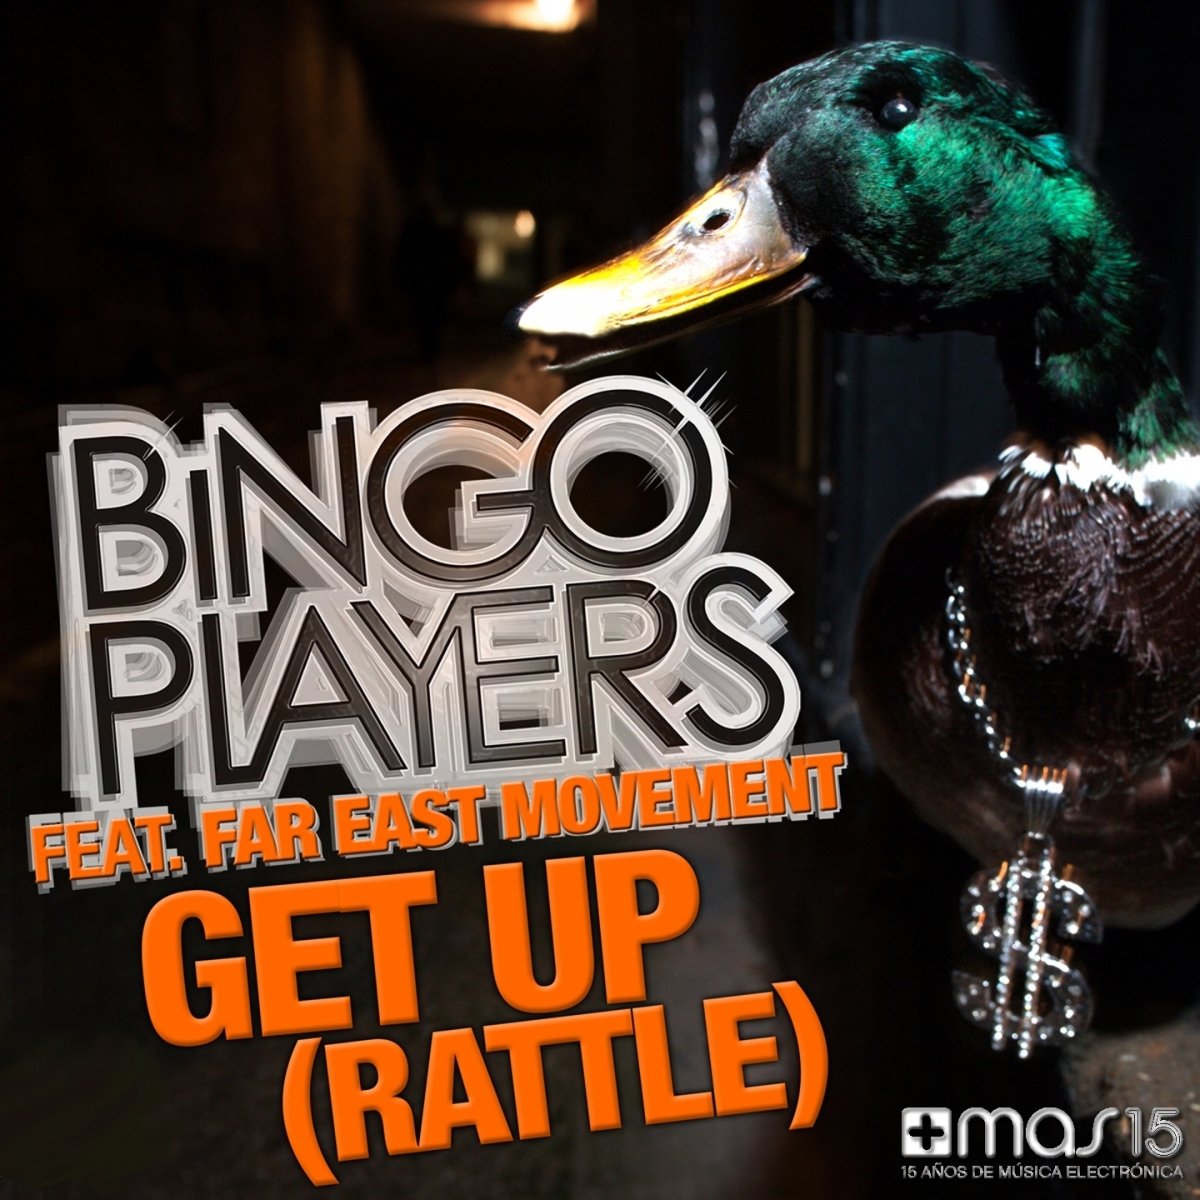 BINGO PLAYERS - Get Up (Rattle) (feat. Far East Movement)